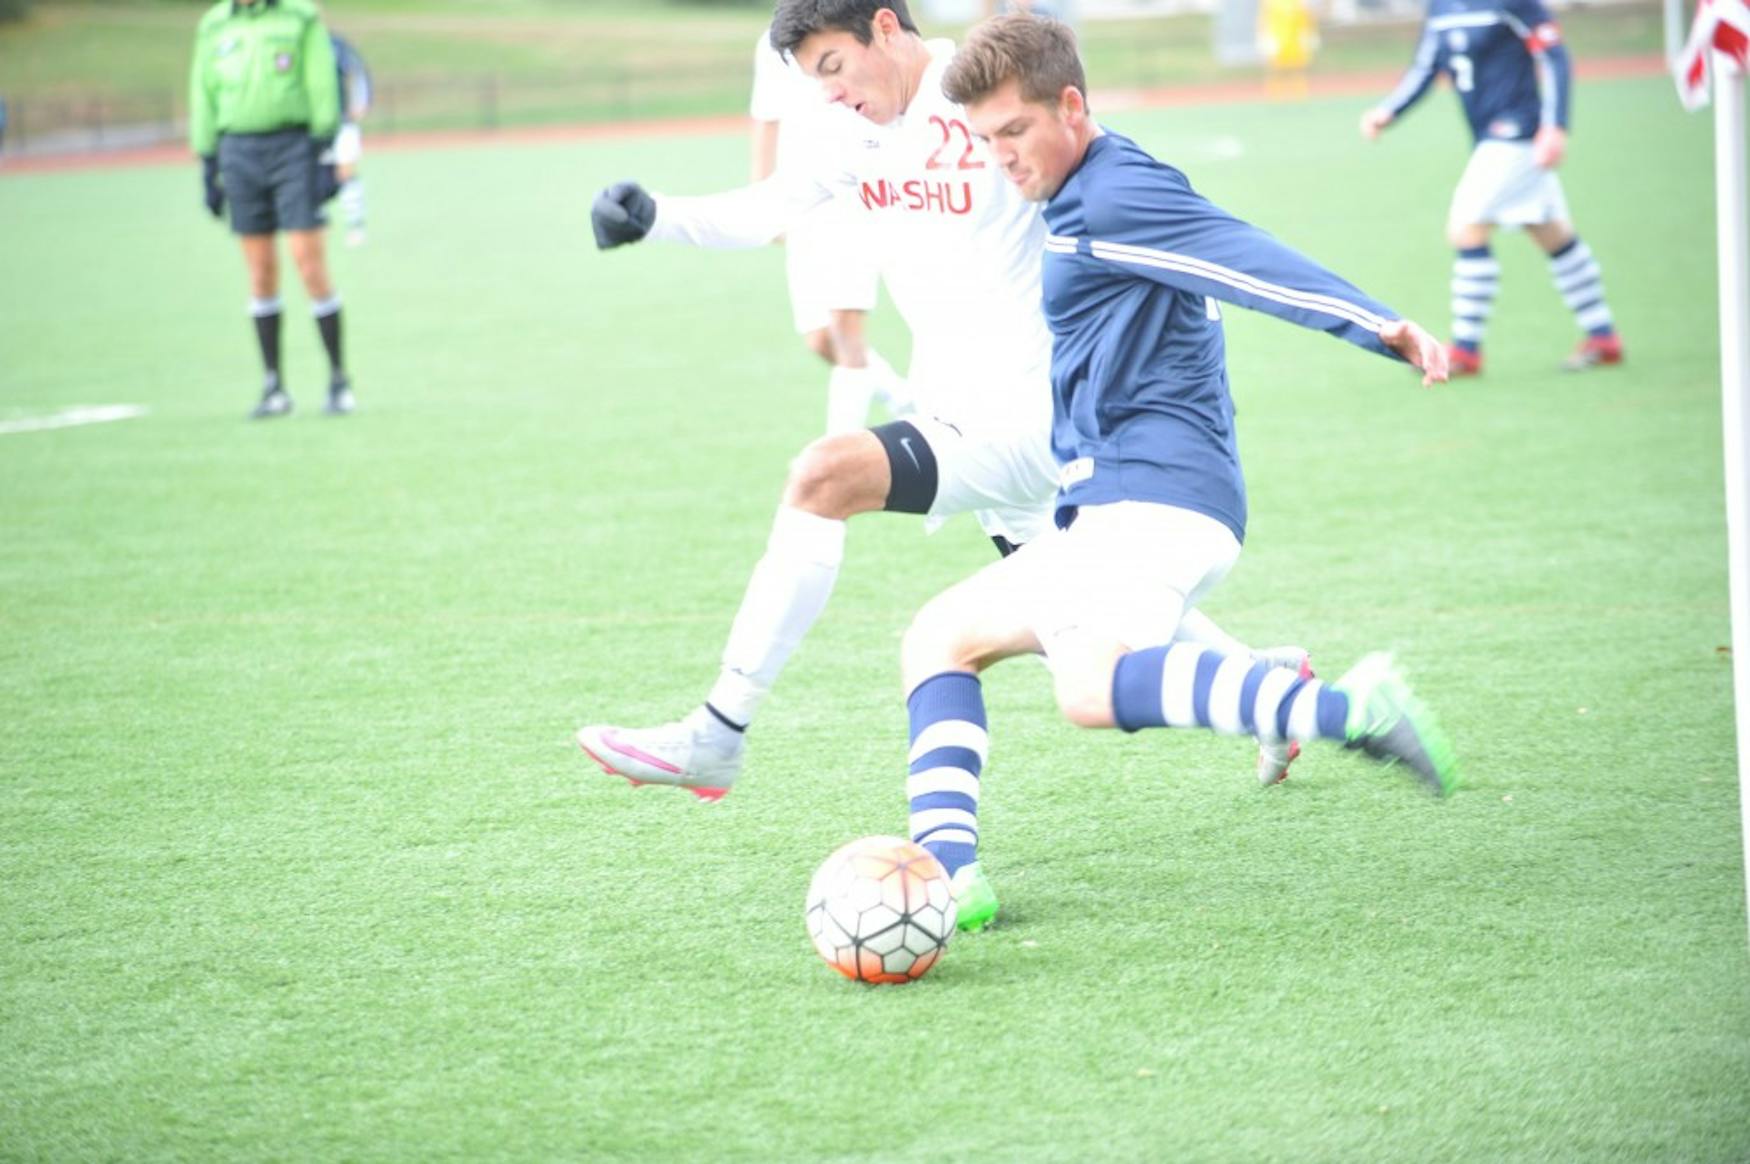 DIRECT PASS: Midfielder Josh Ocel ’17 reaches back for a strike during the squad’s 2-0 defeat to Washington University in St. Louis.